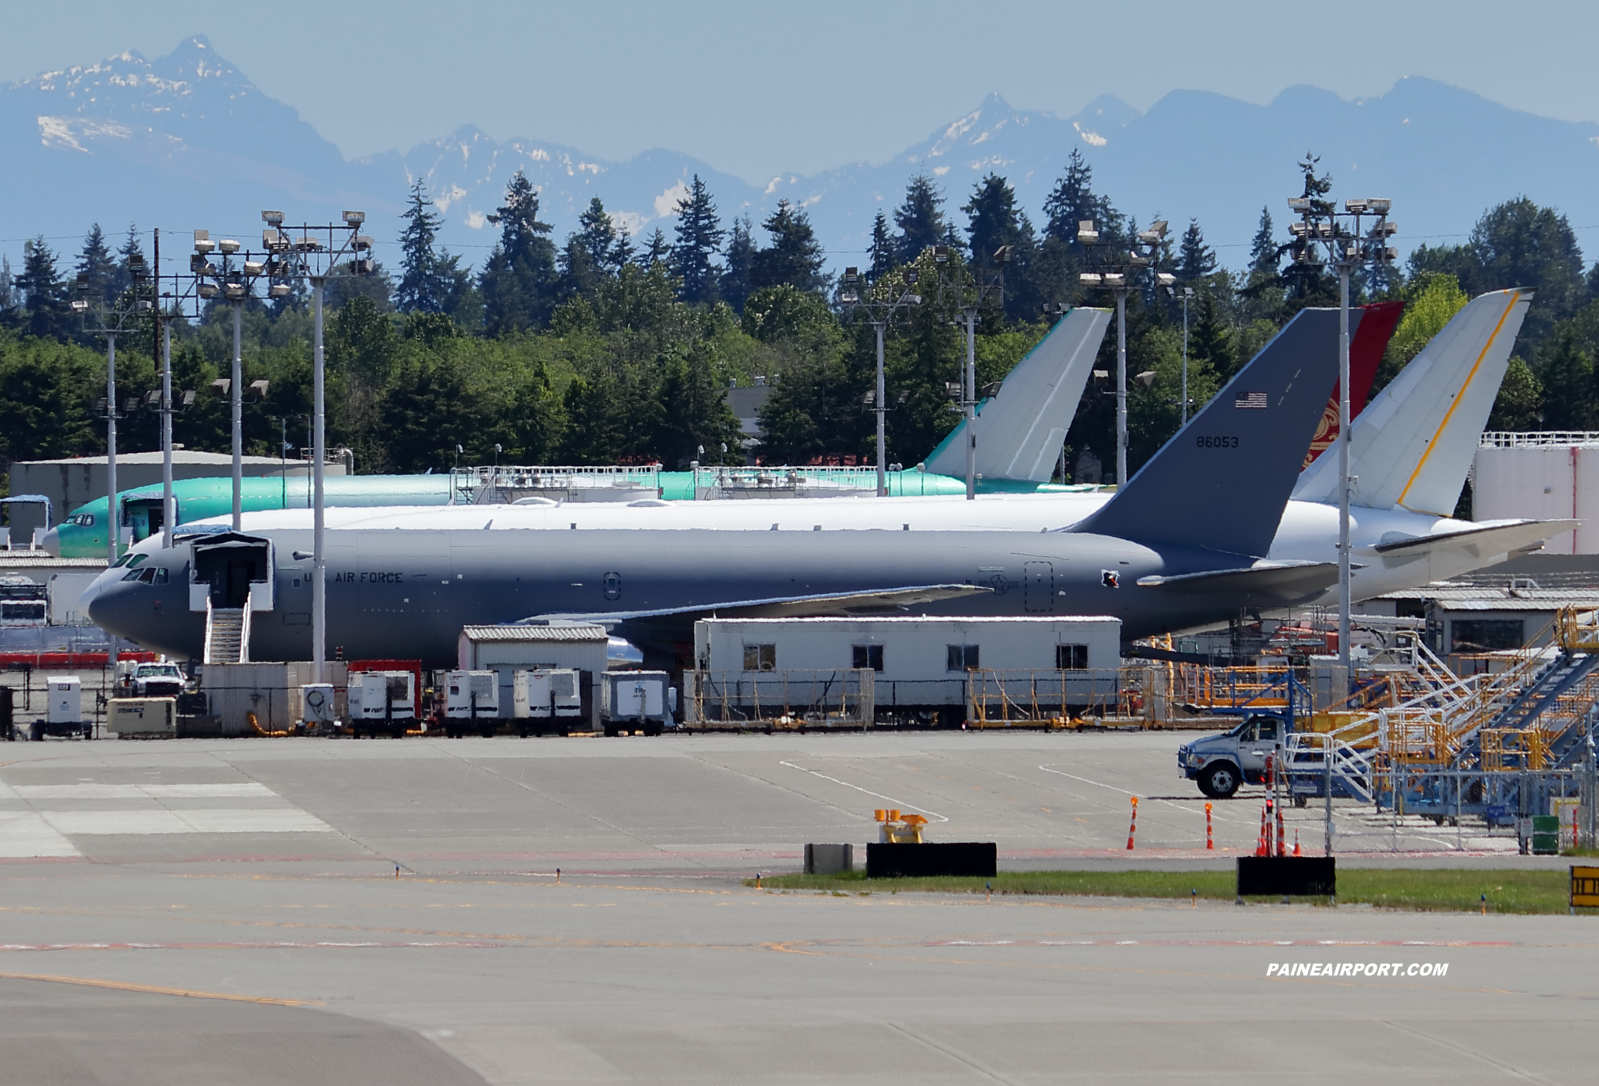 Scoot 787-8 at Paine Field